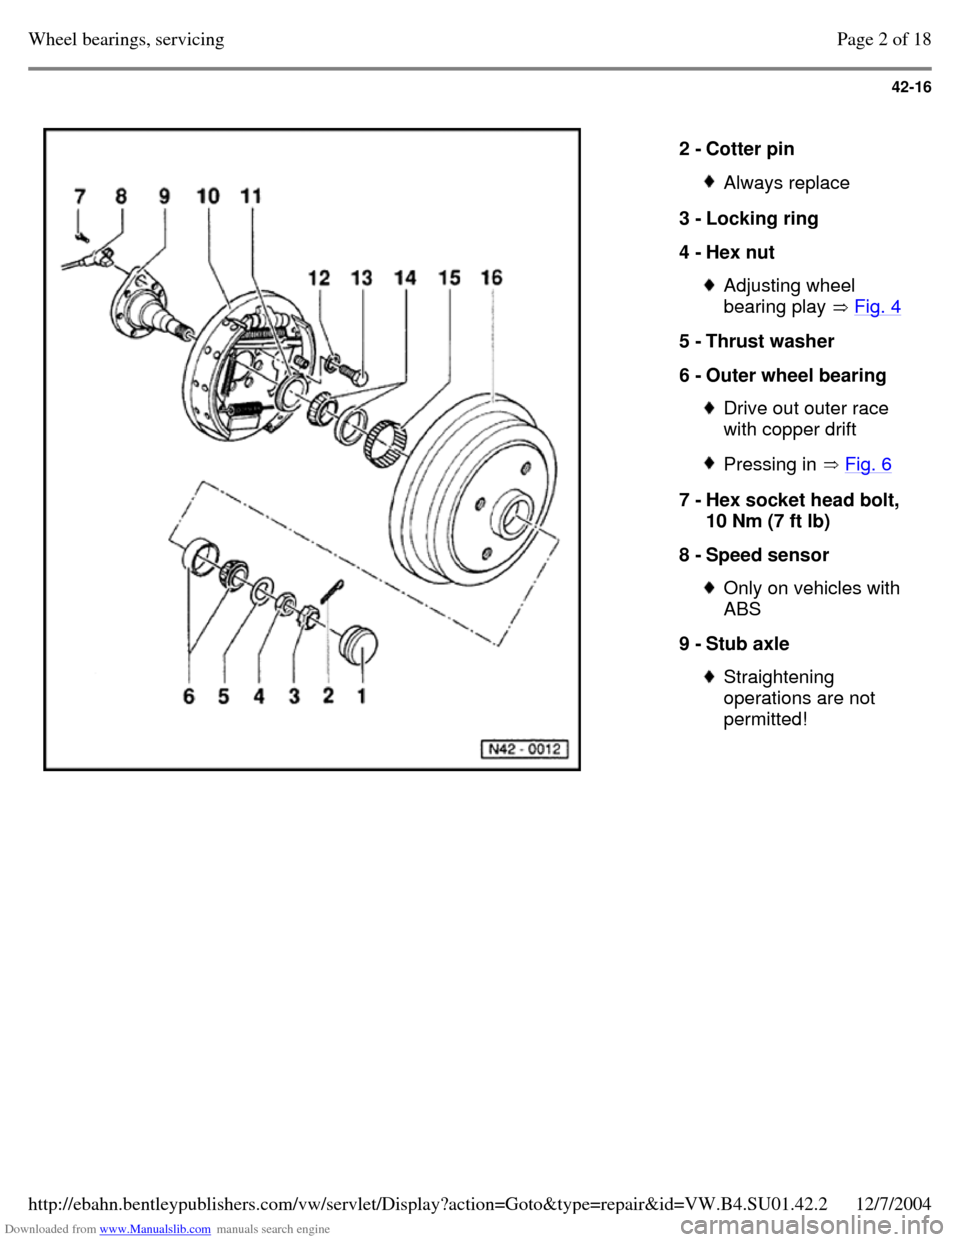 VOLKSWAGEN PASSAT 1995 B3, B4 / 3.G Service Workshop Manual Downloaded from www.Manualslib.com manuals search engine 42-16
   
2 - Cotter pin  Always replace 3 - Locking ring 
4 - Hex nut  Adjusting wheel 
bearing play  Fig. 4 5 - Thrust washer 
6 - Outer whee